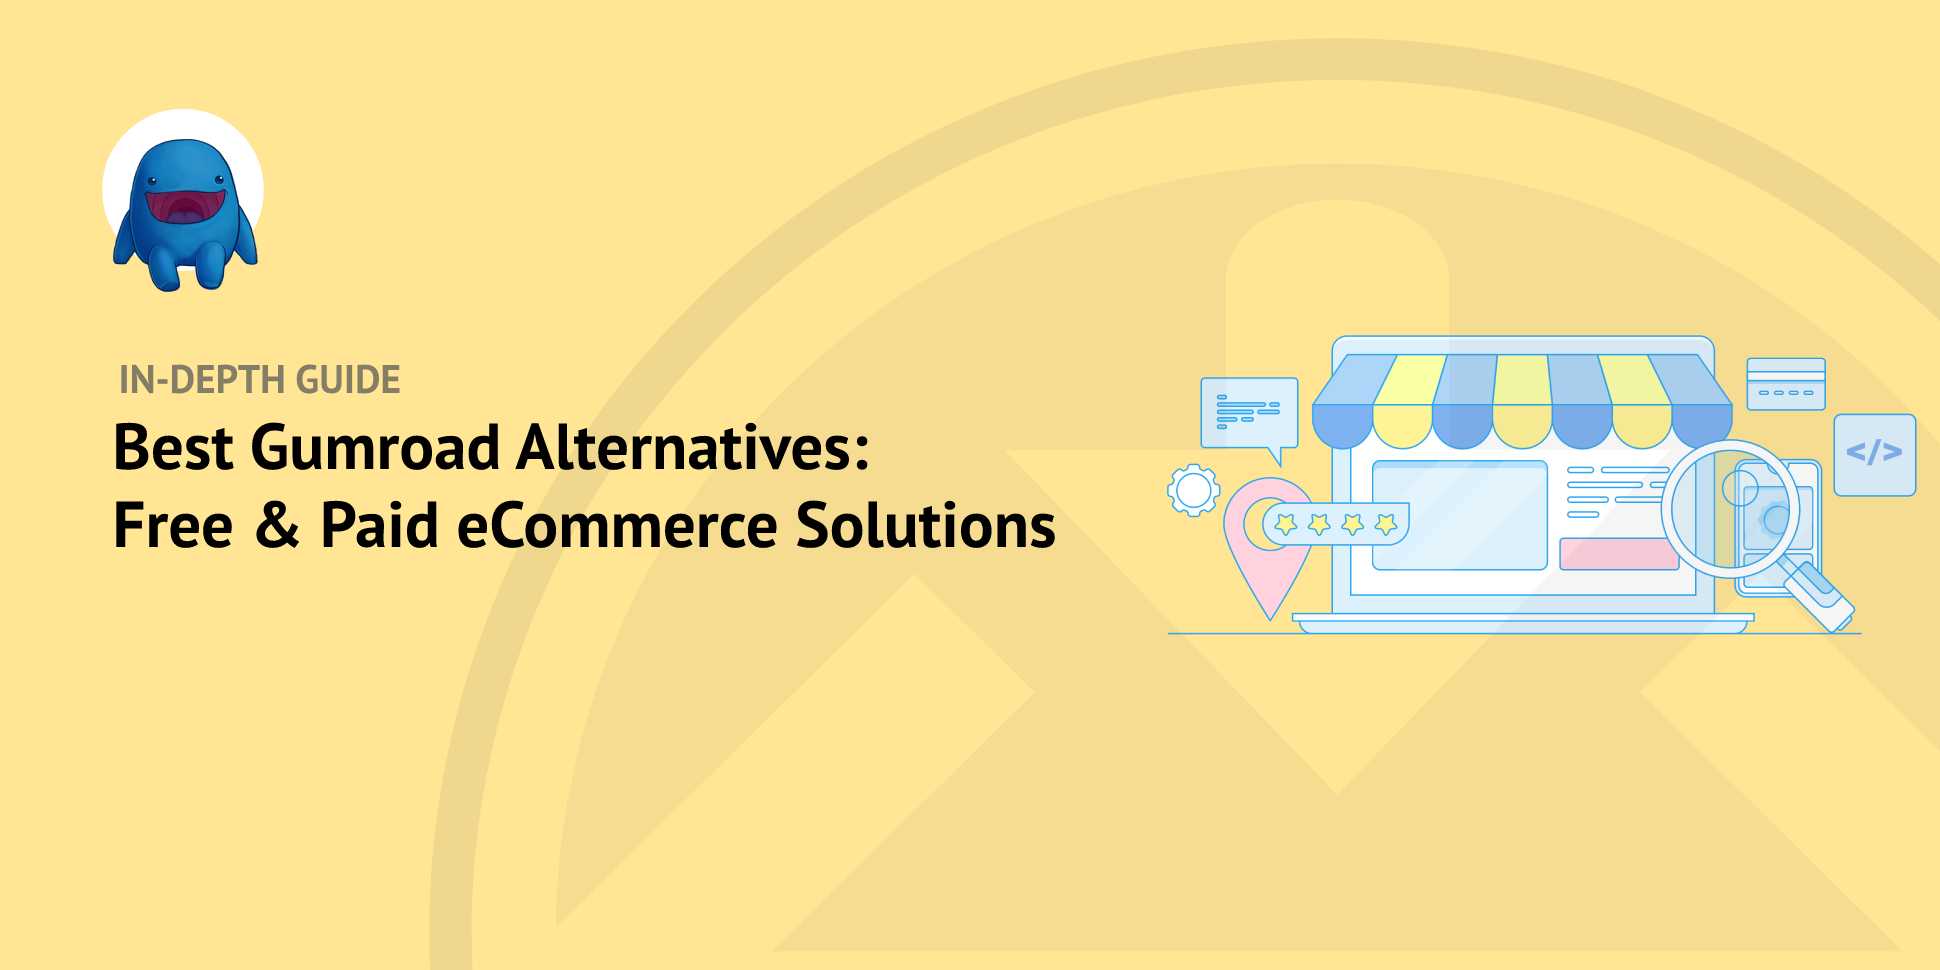 Best Gumroad Alternatives: Free & Paid eCommerce Solutions